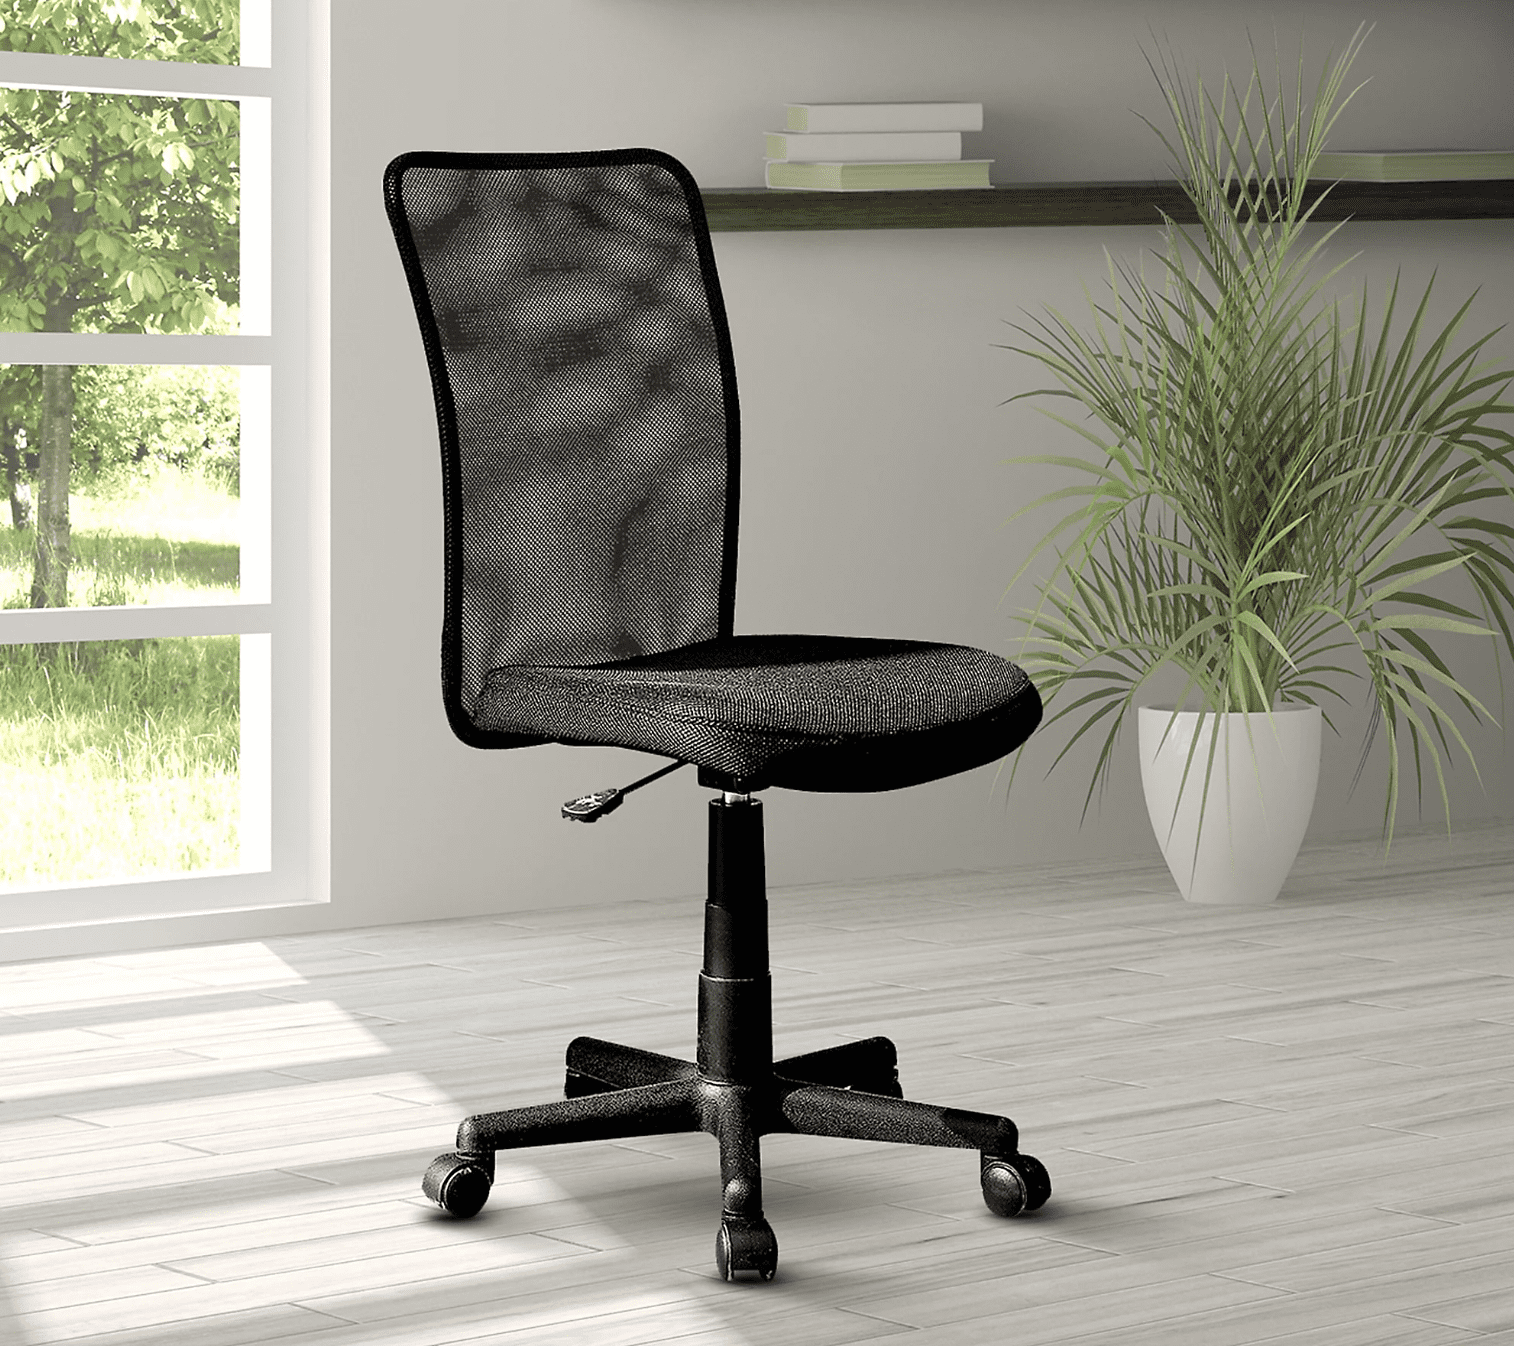 11 Of The Best Cheap Home Office Chairs Under $100